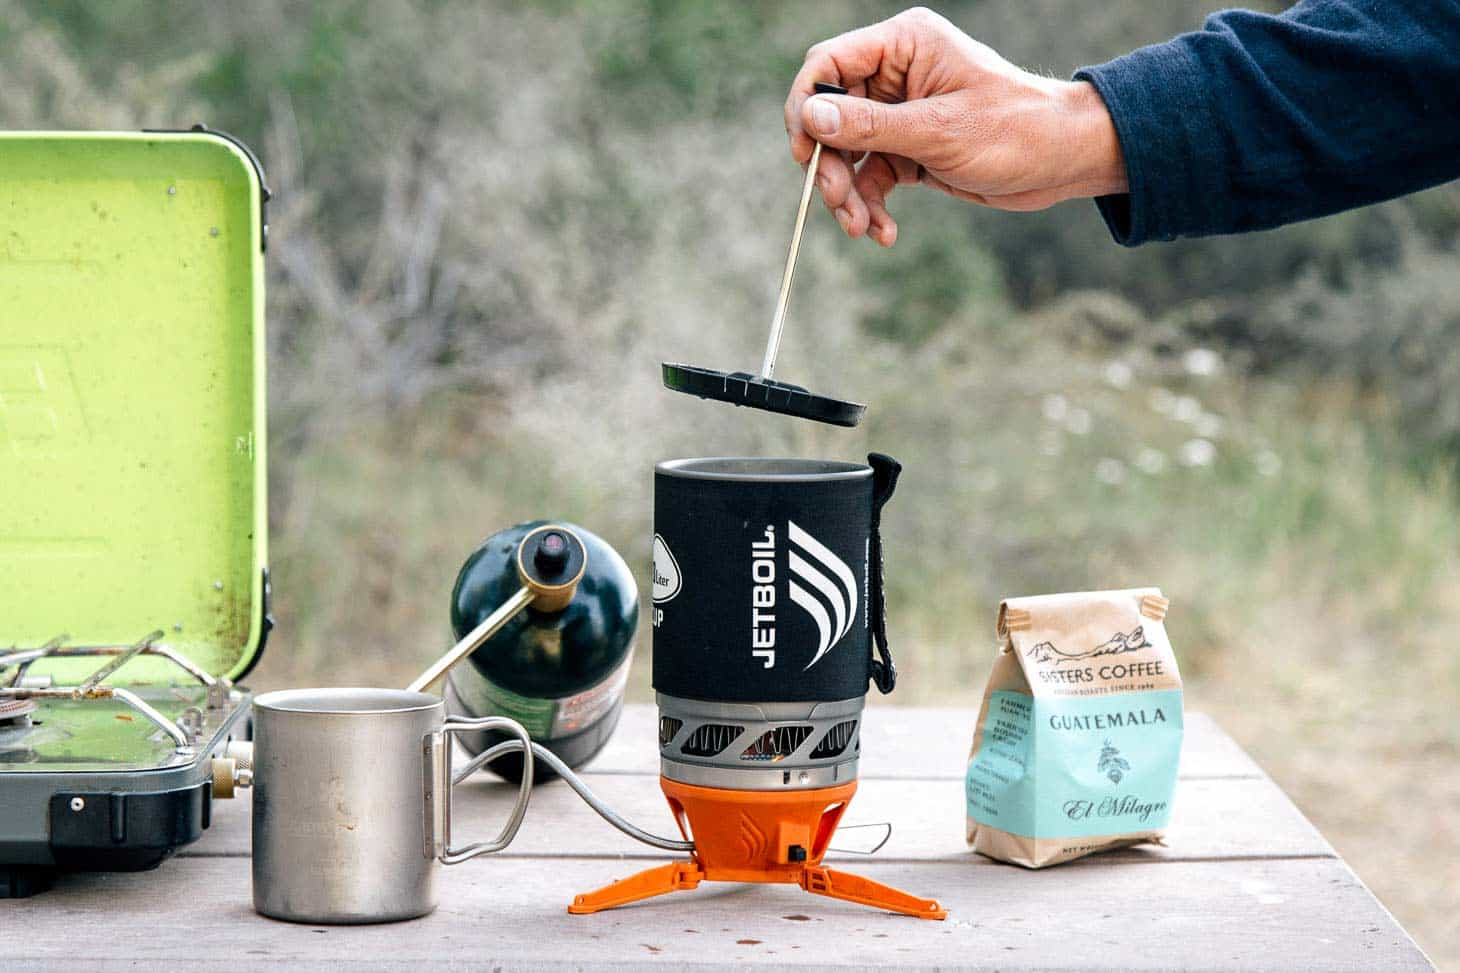 Michael using the jet boil camping coffee press